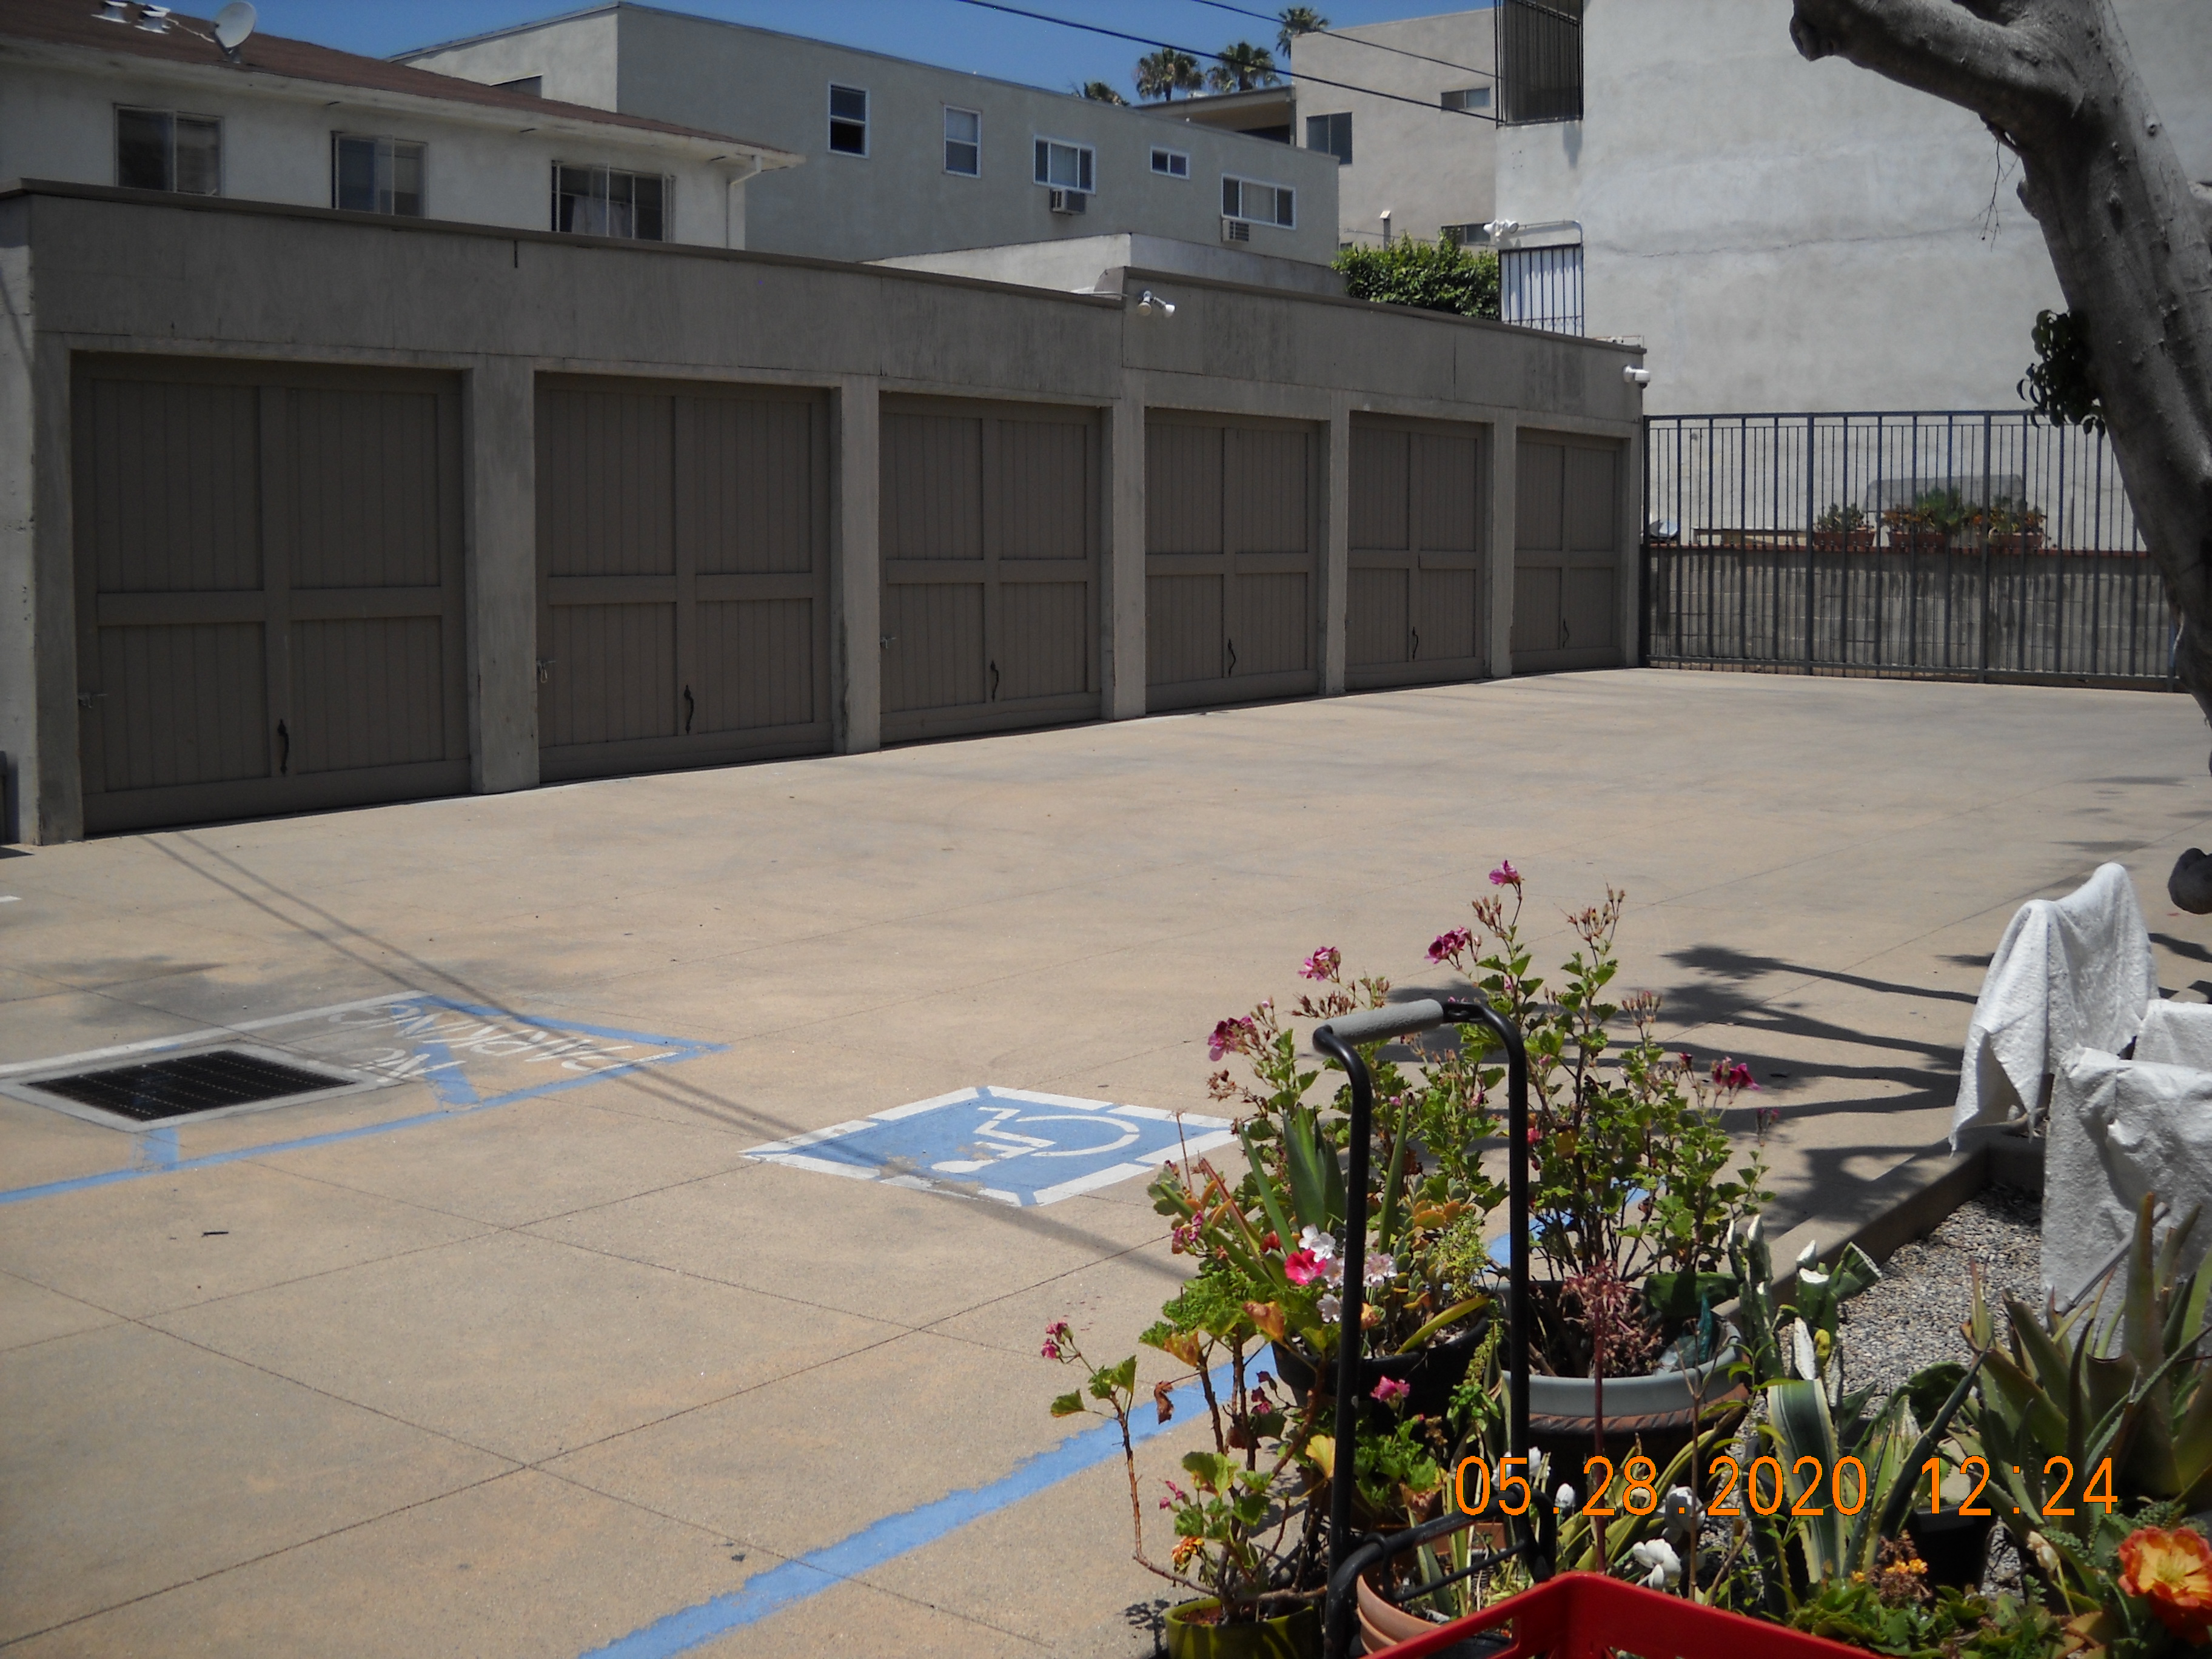 View of an outdoor parking lot with a regular and accessible space viewable. There is a one story with multiple closed storage spaces.